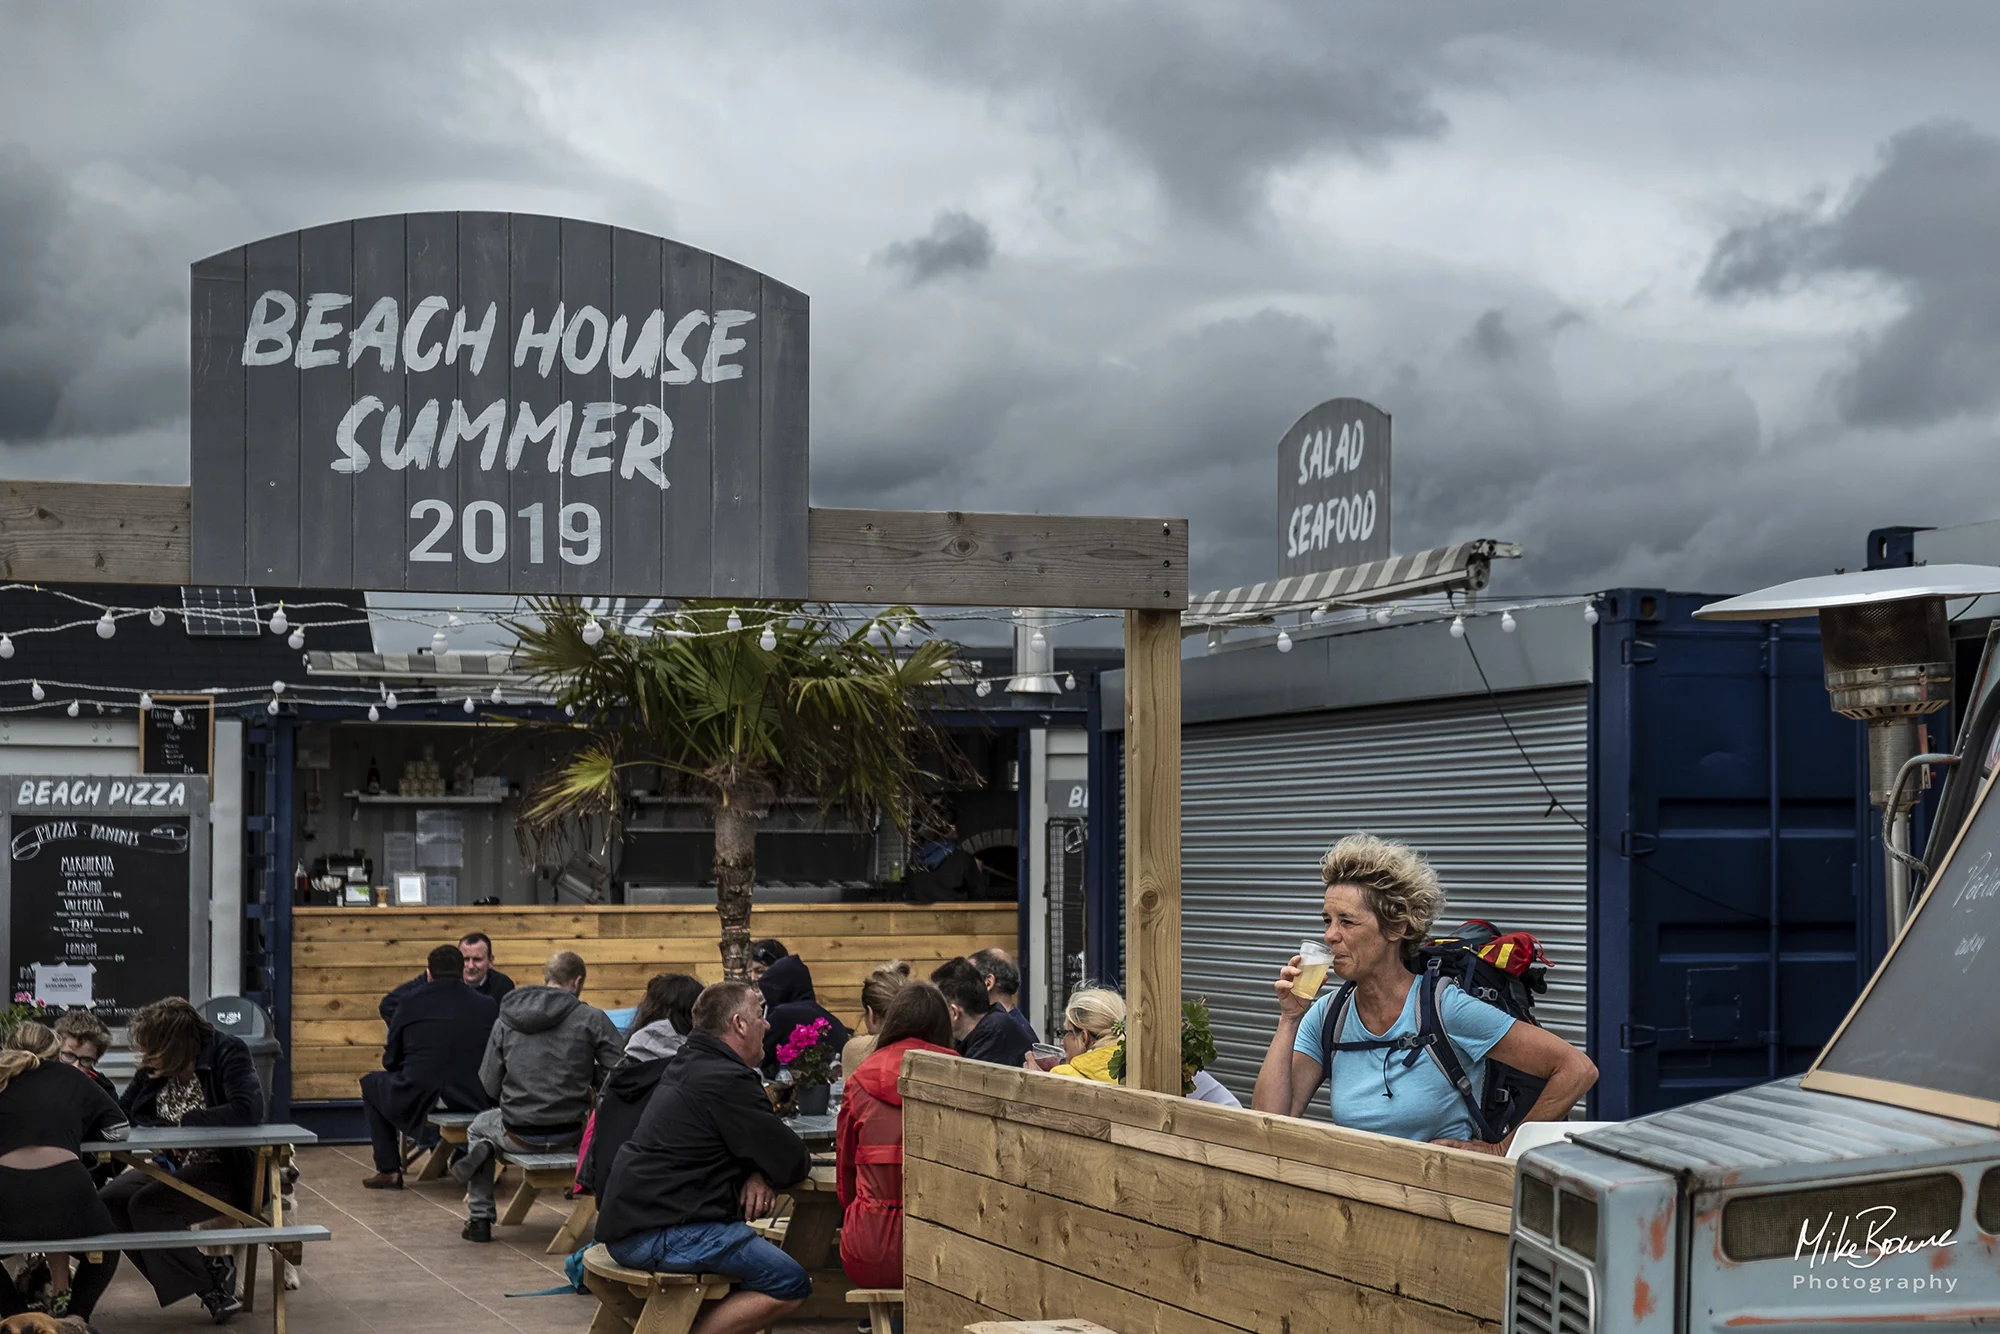 People at a British beach bar on a cloudy windy day